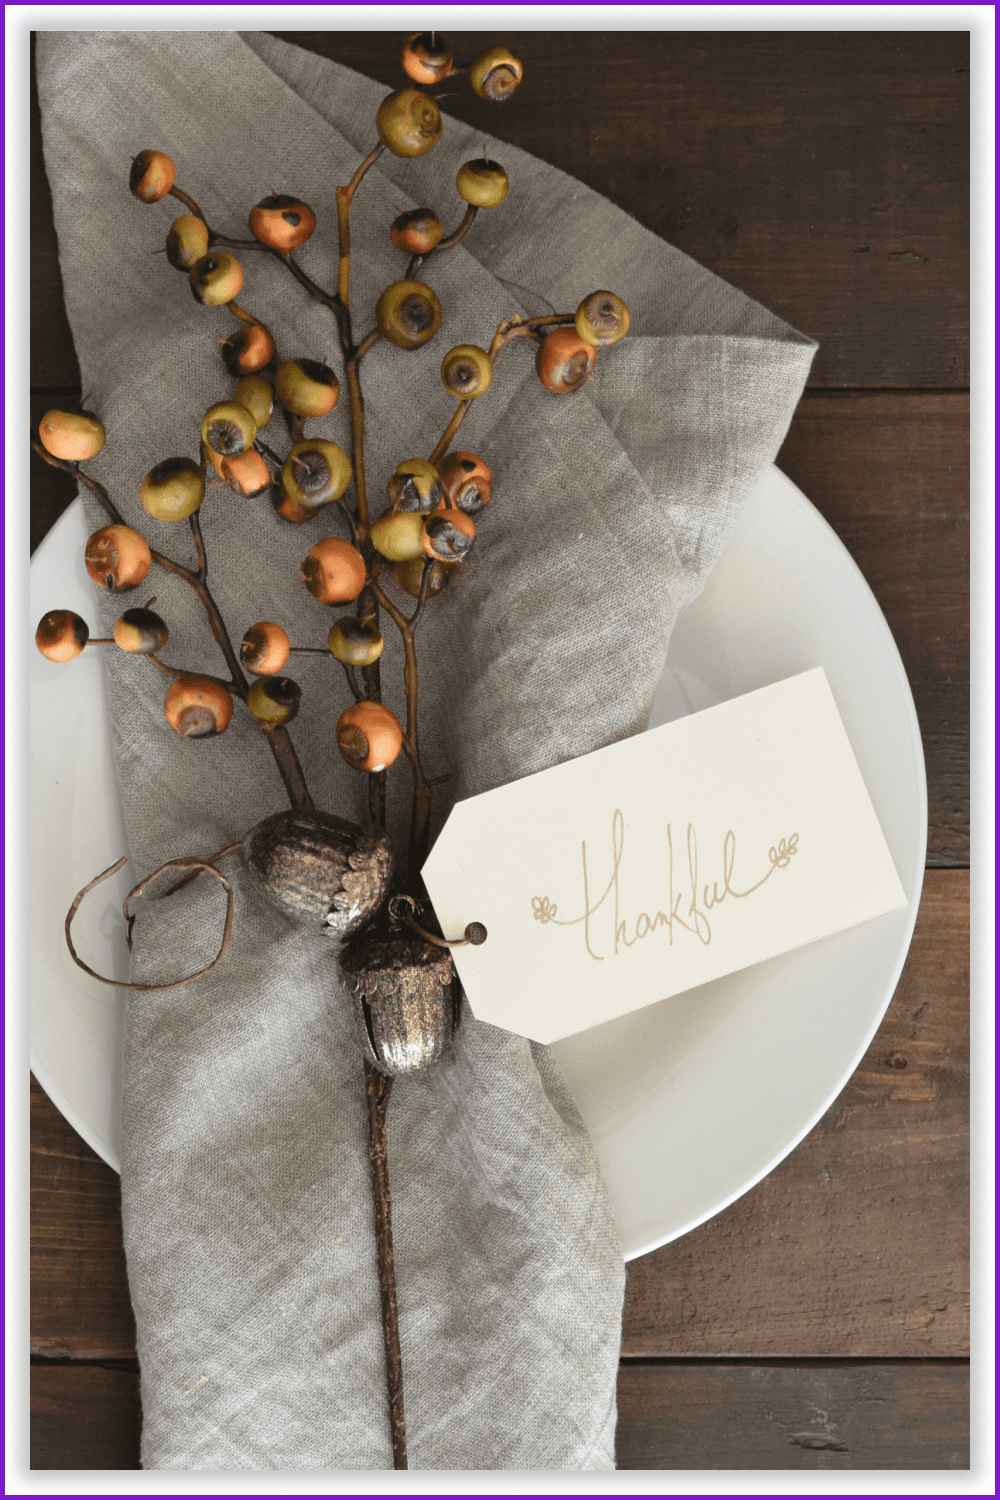 A table serving with a “Thankful” tag, a napkin, and decorative oak branches on top.